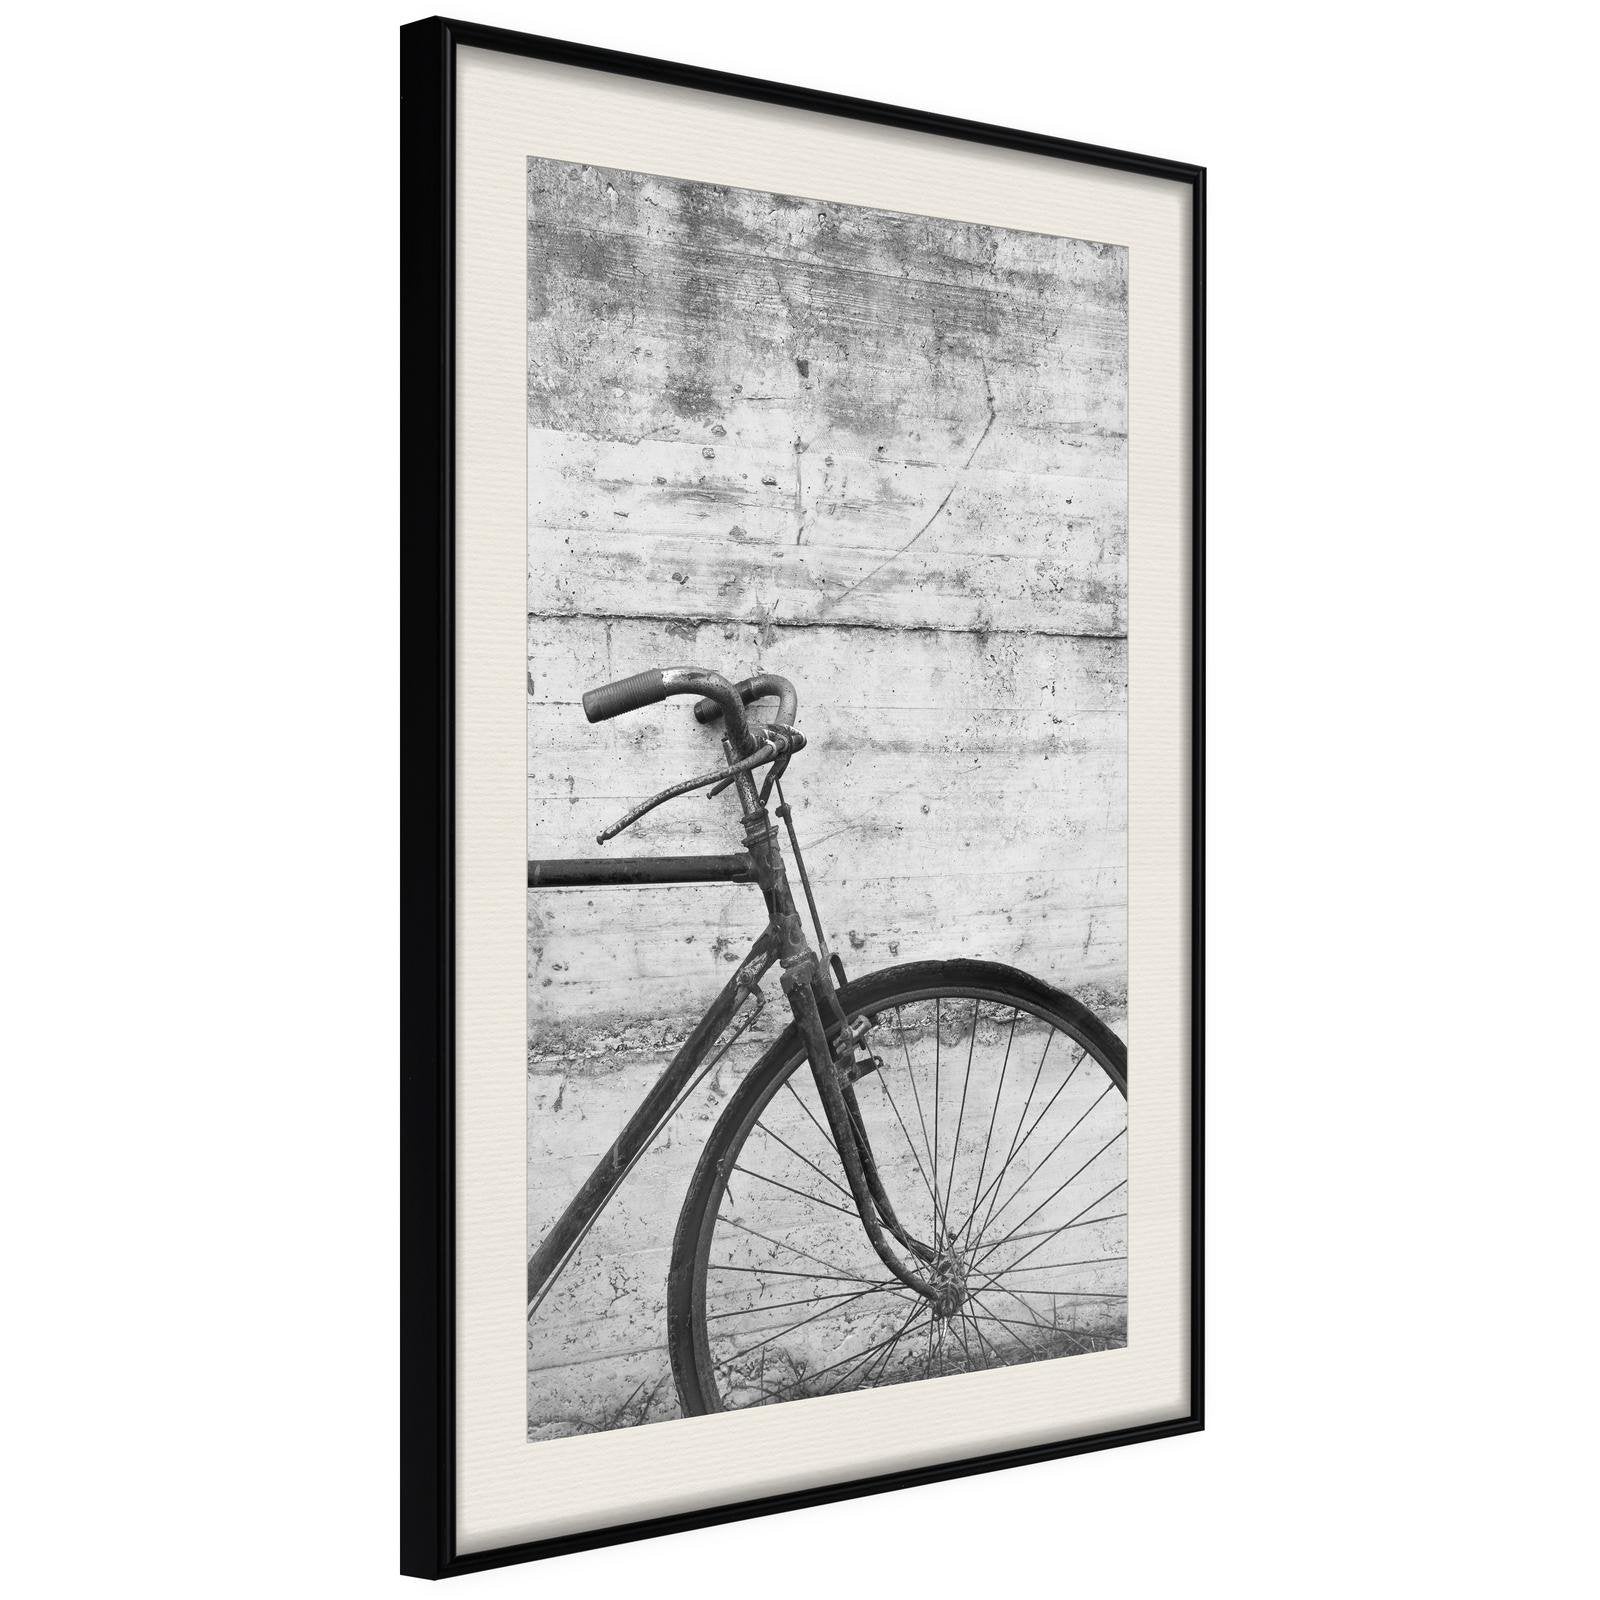 Inramad Poster / Tavla - Bicycle Leaning Against the Wall-Poster Inramad-Artgeist-20x30-Svart ram med passepartout-peaceofhome.se